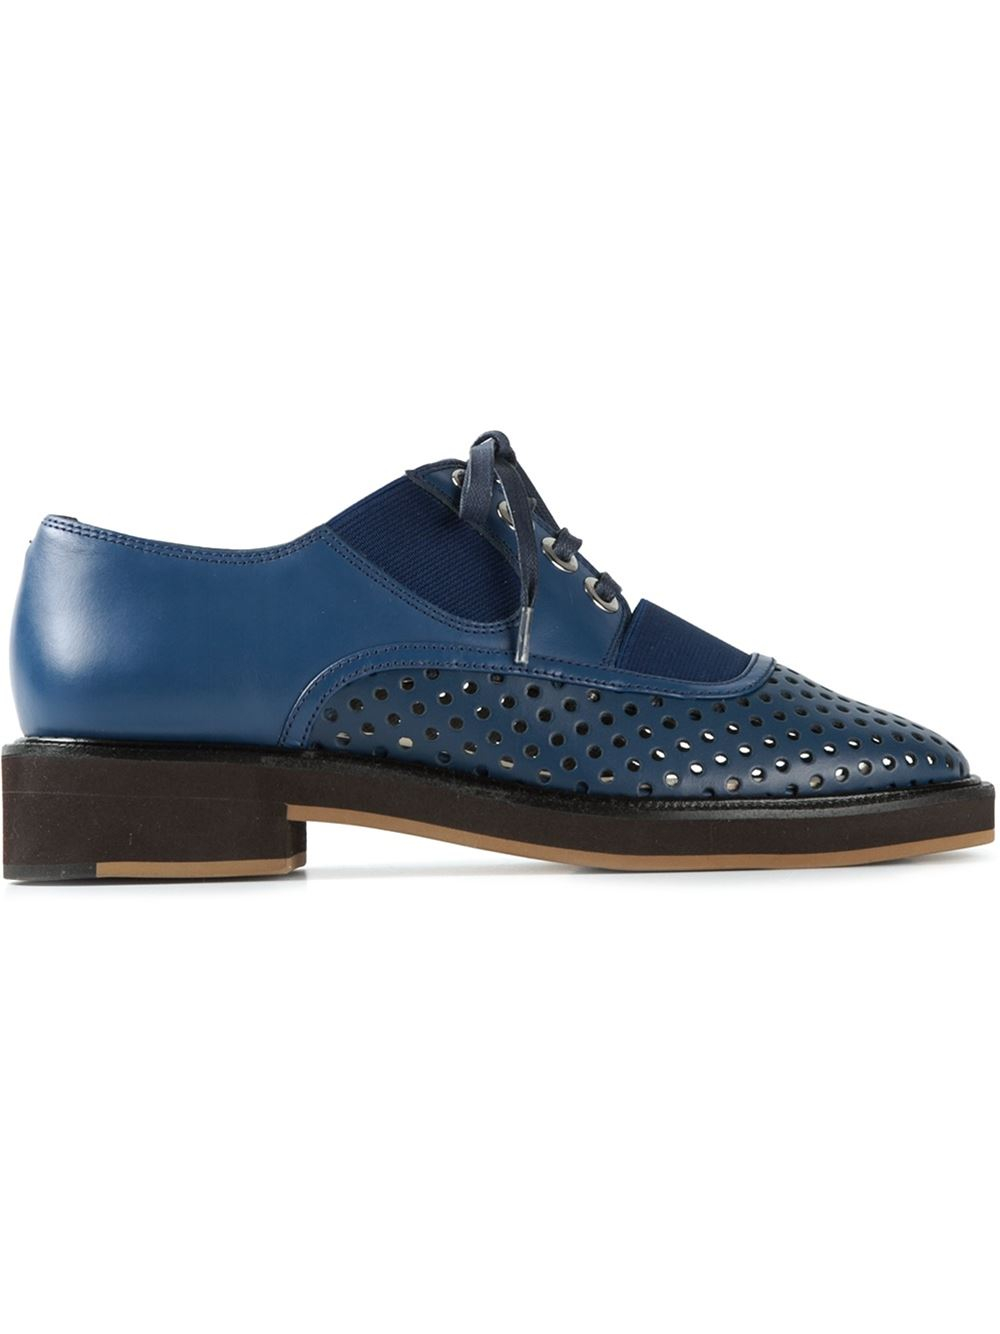 Jil sander navy Perforated Panel Derby Shoes in Blue Lyst